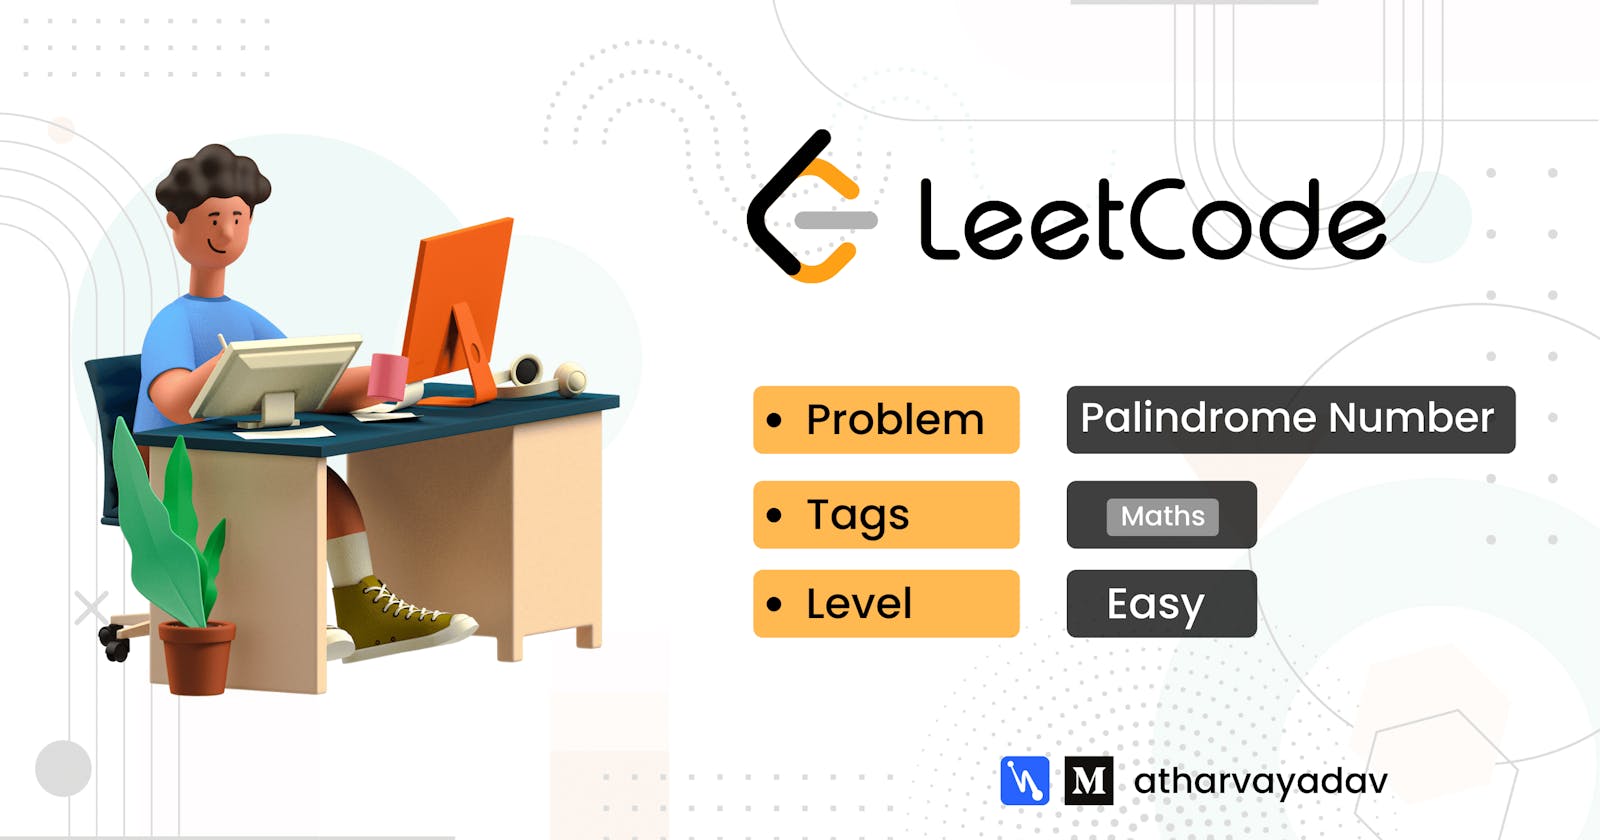 9. Palindrome Number LeetCode Solution